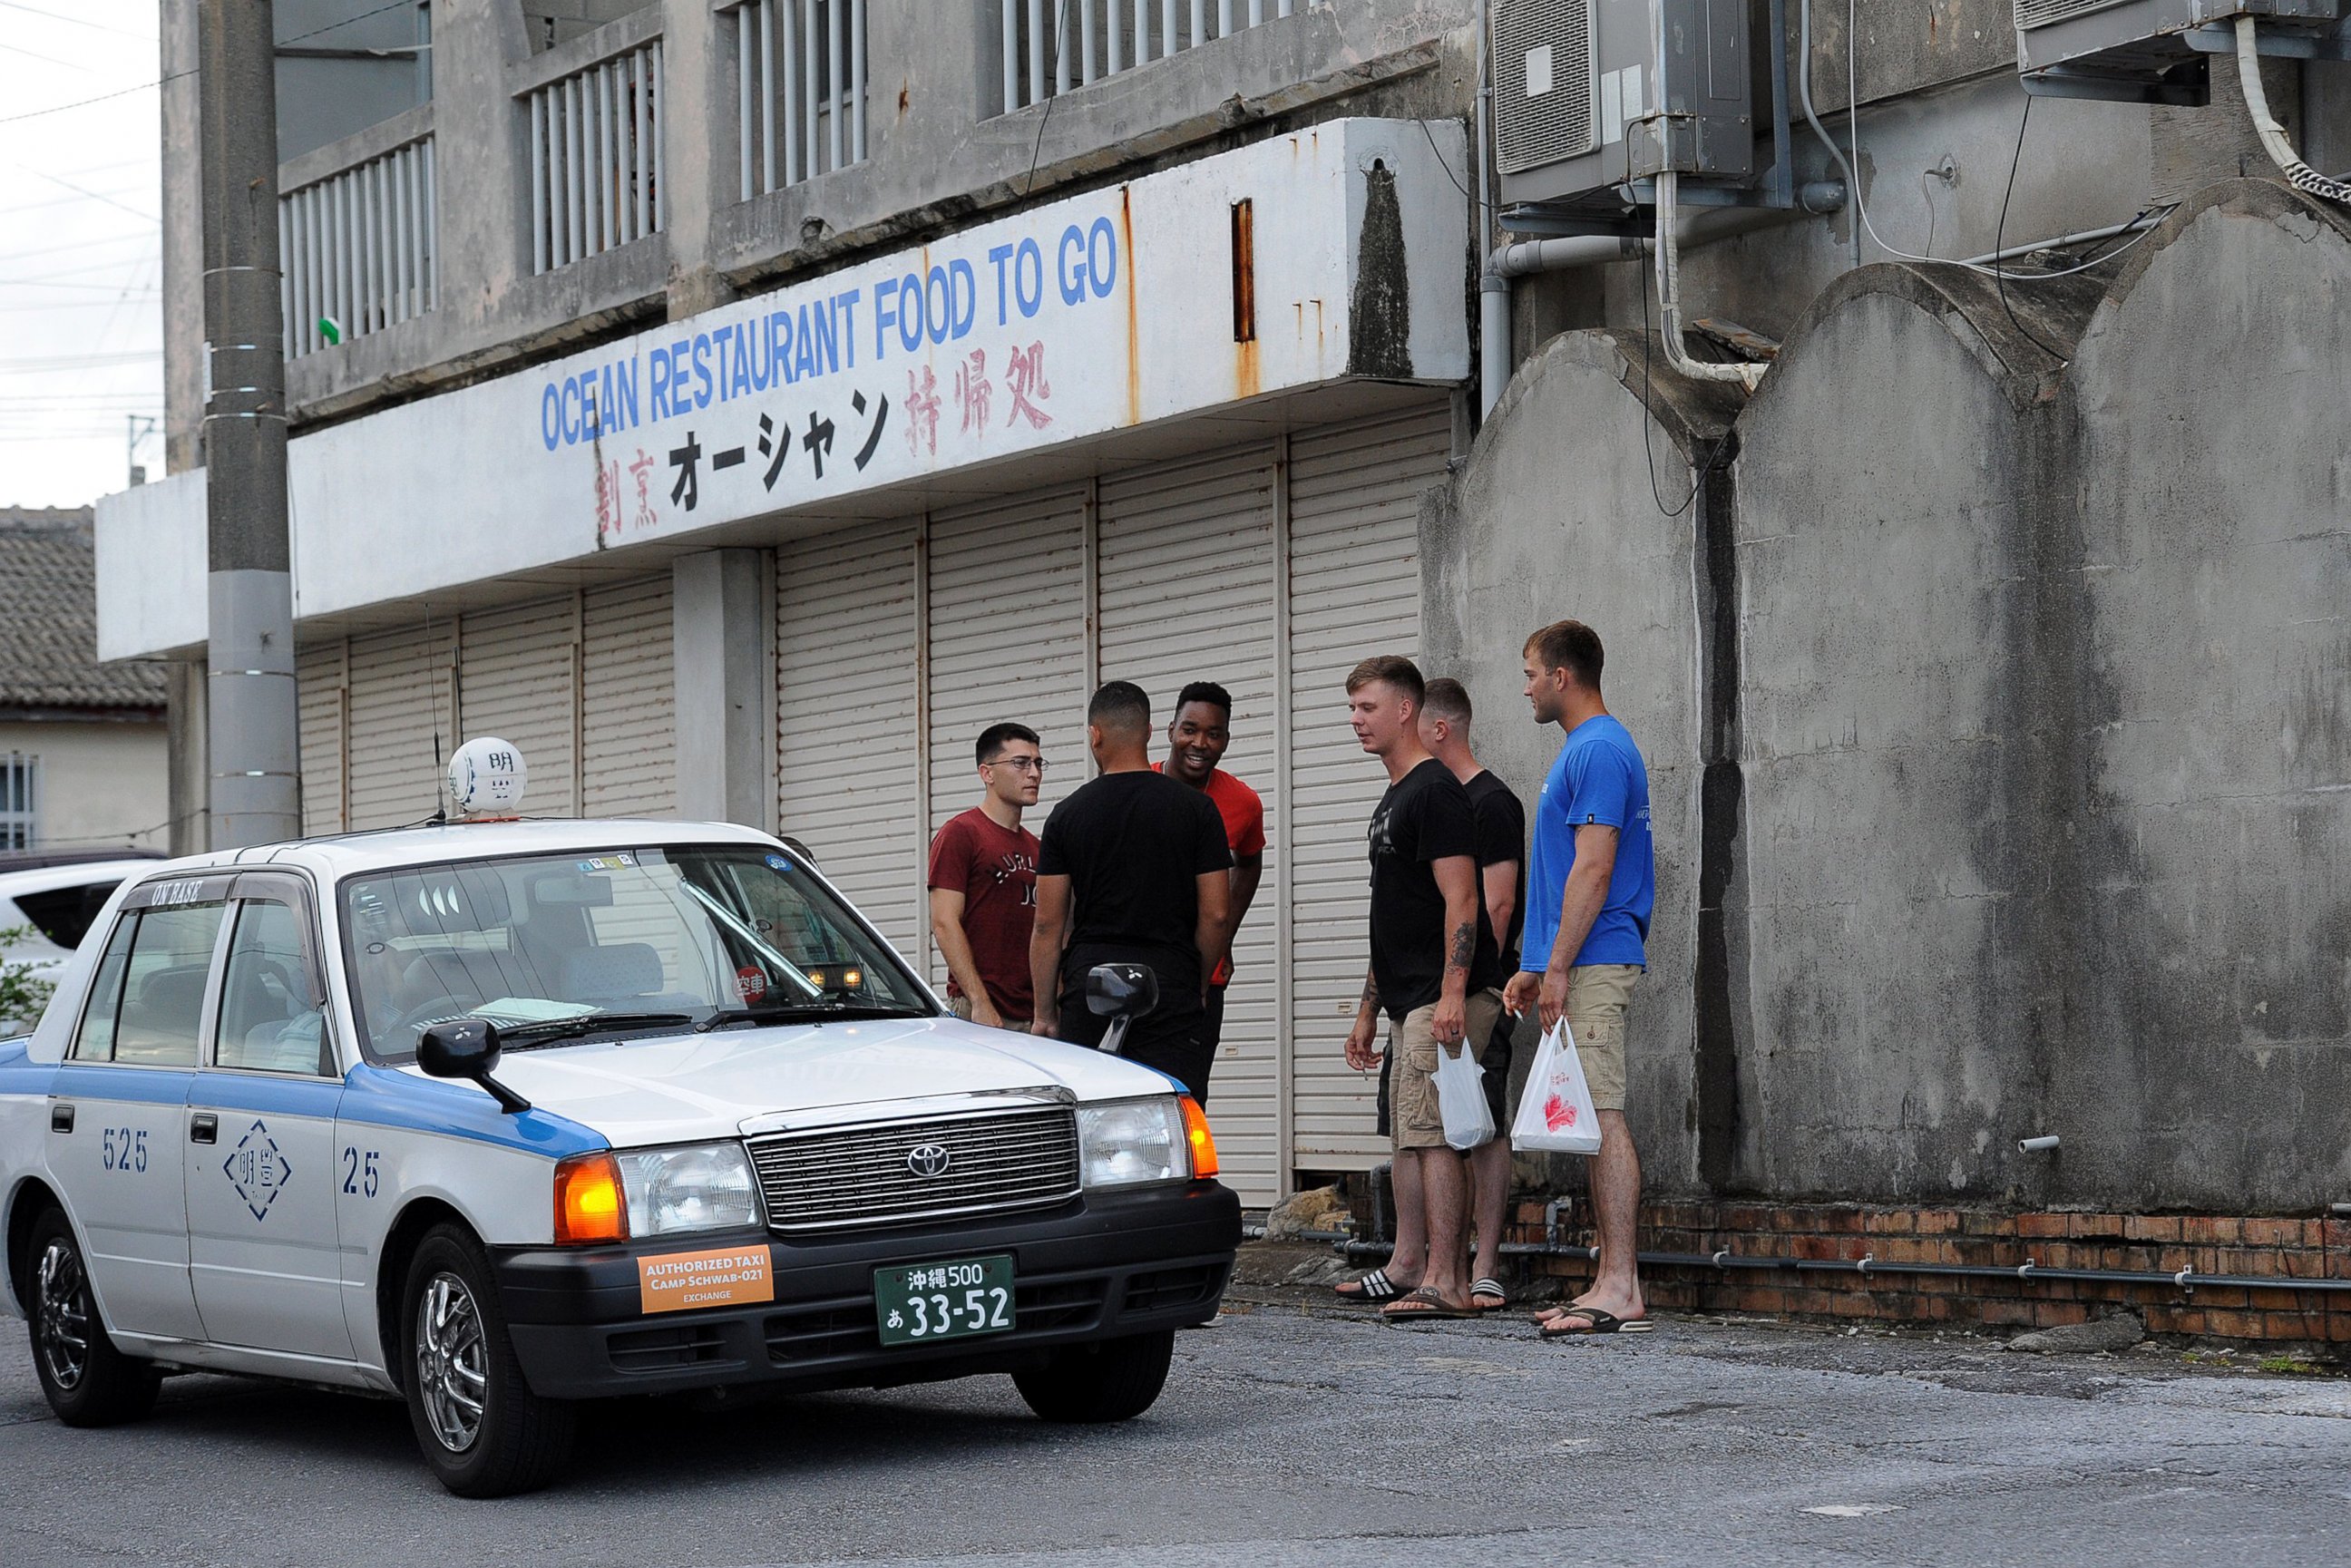 PHOTO: Marines from nearby Camp Schwab arrive by taxi at a sushi Restaurant in Henoko, Okinawa, where most of the restaurant's business comes from military customers. 